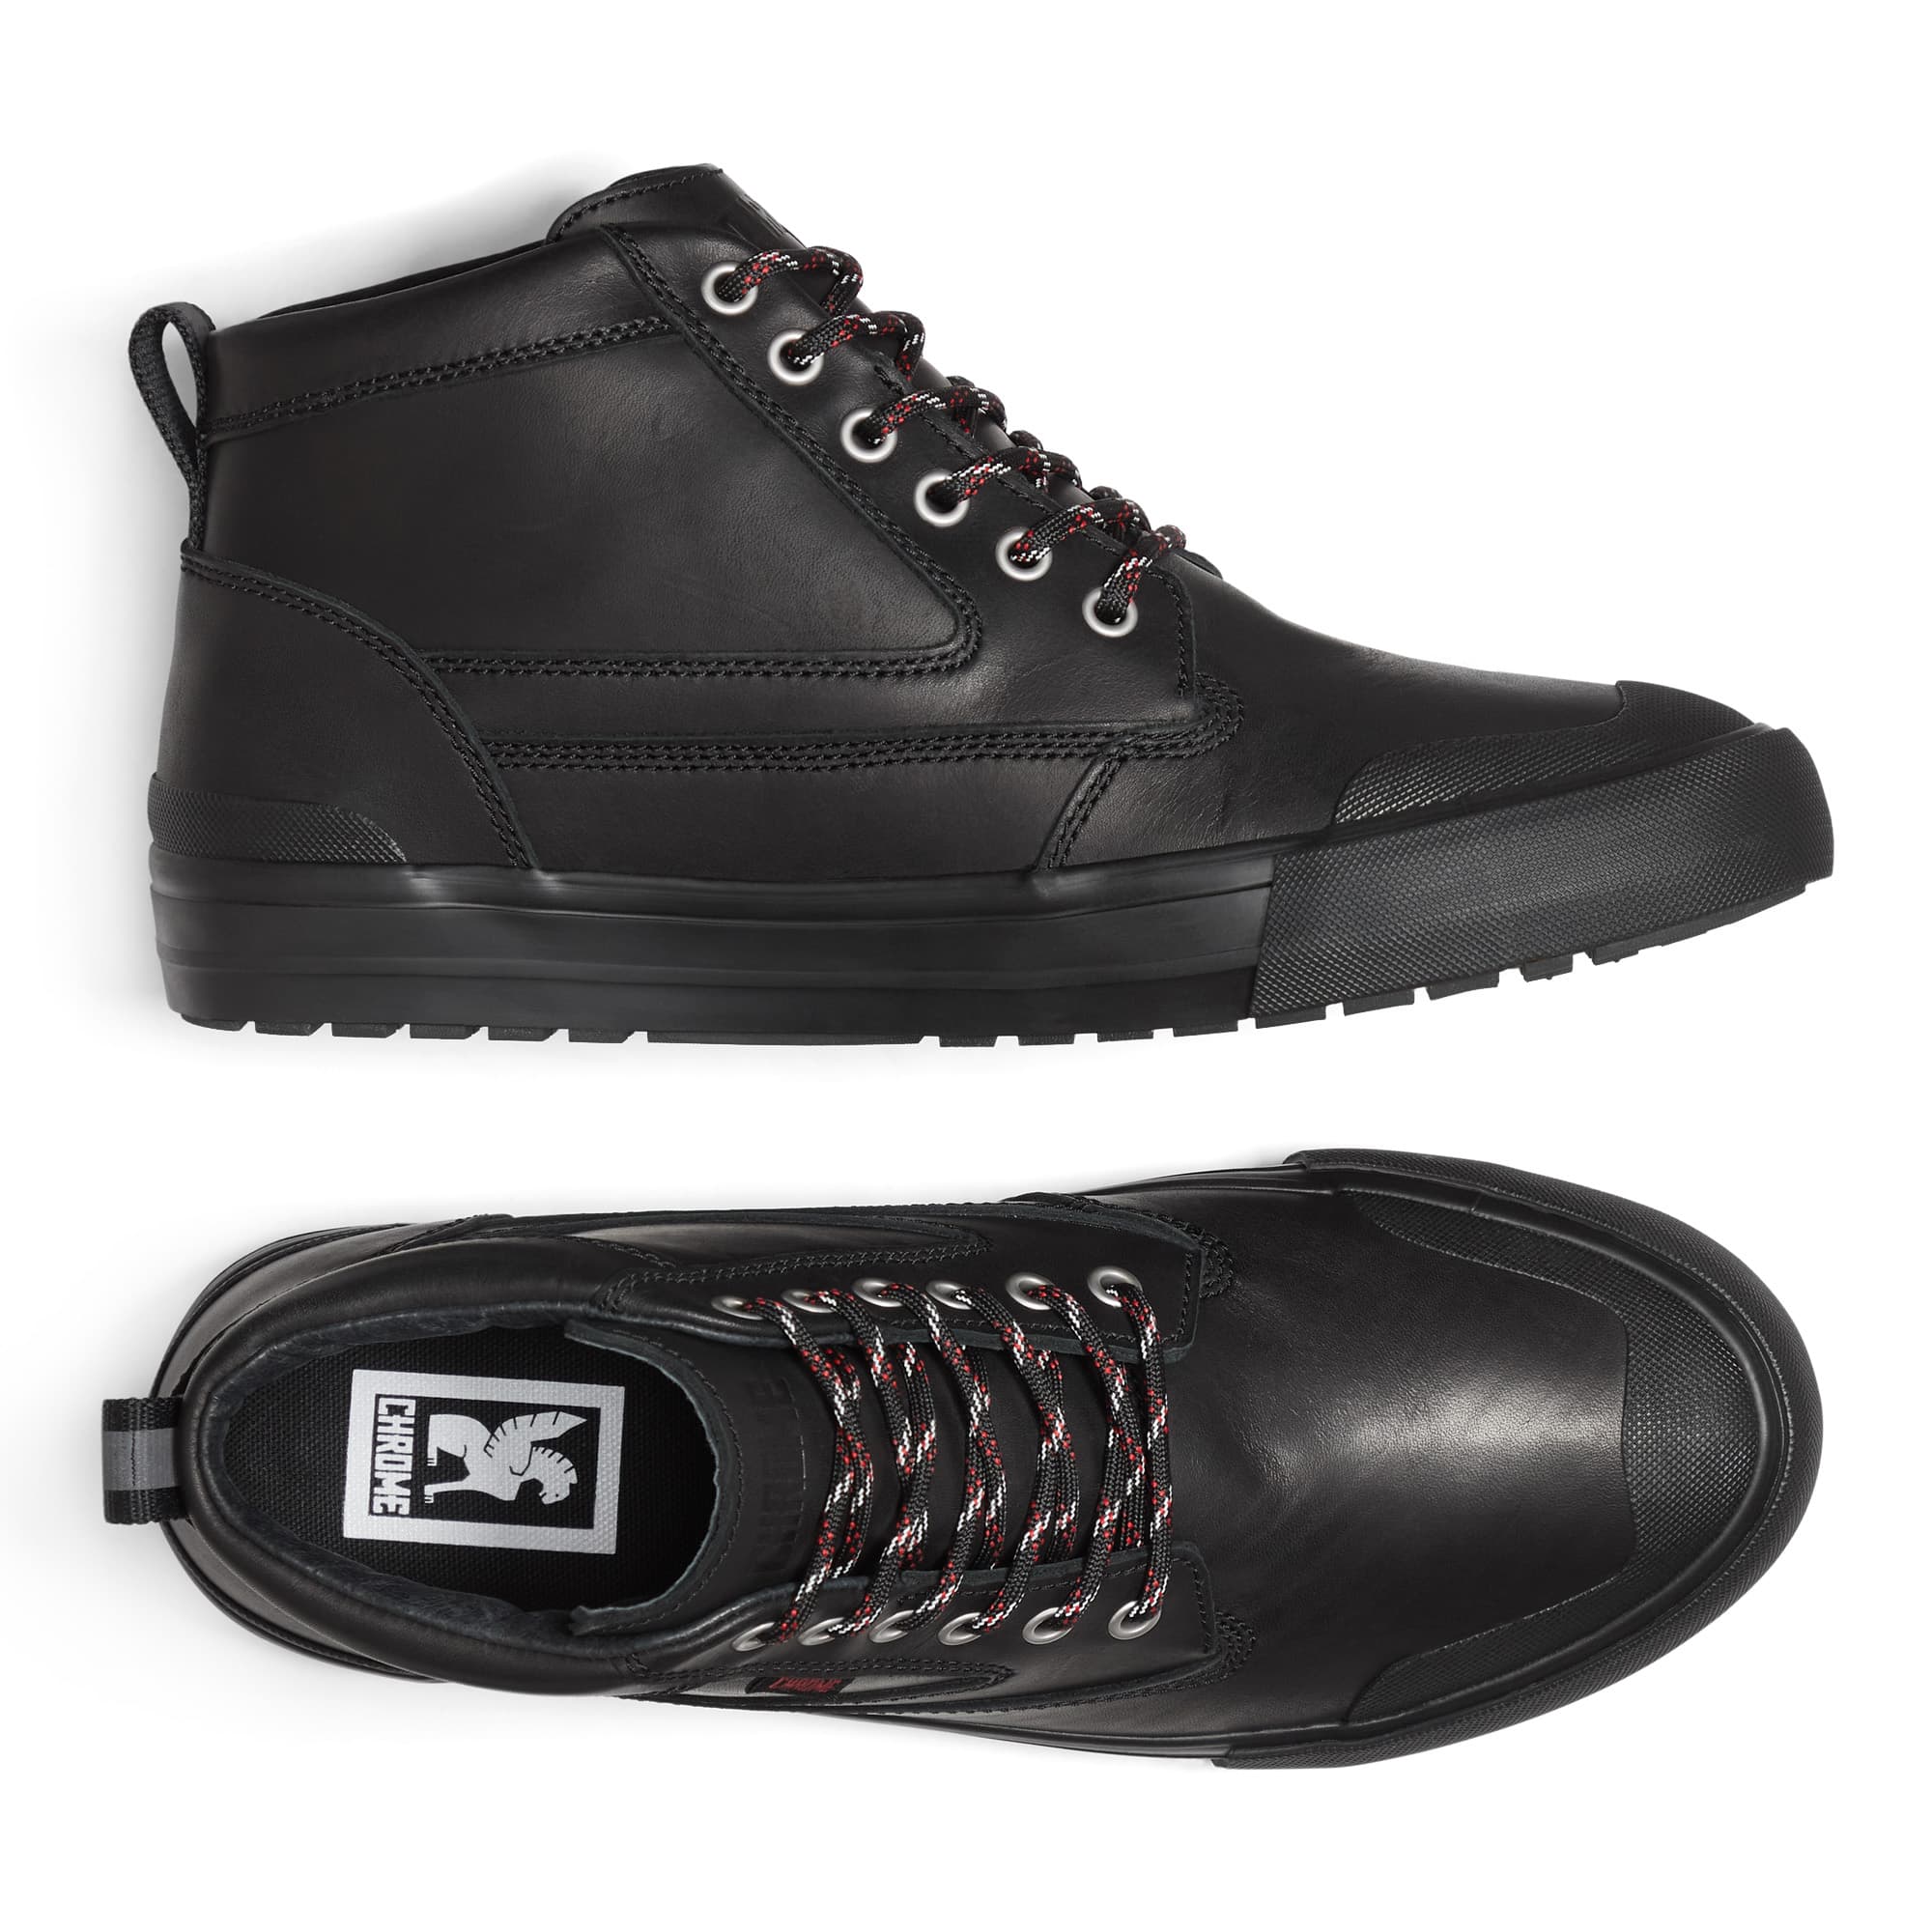 Storm 415 Traction Boot